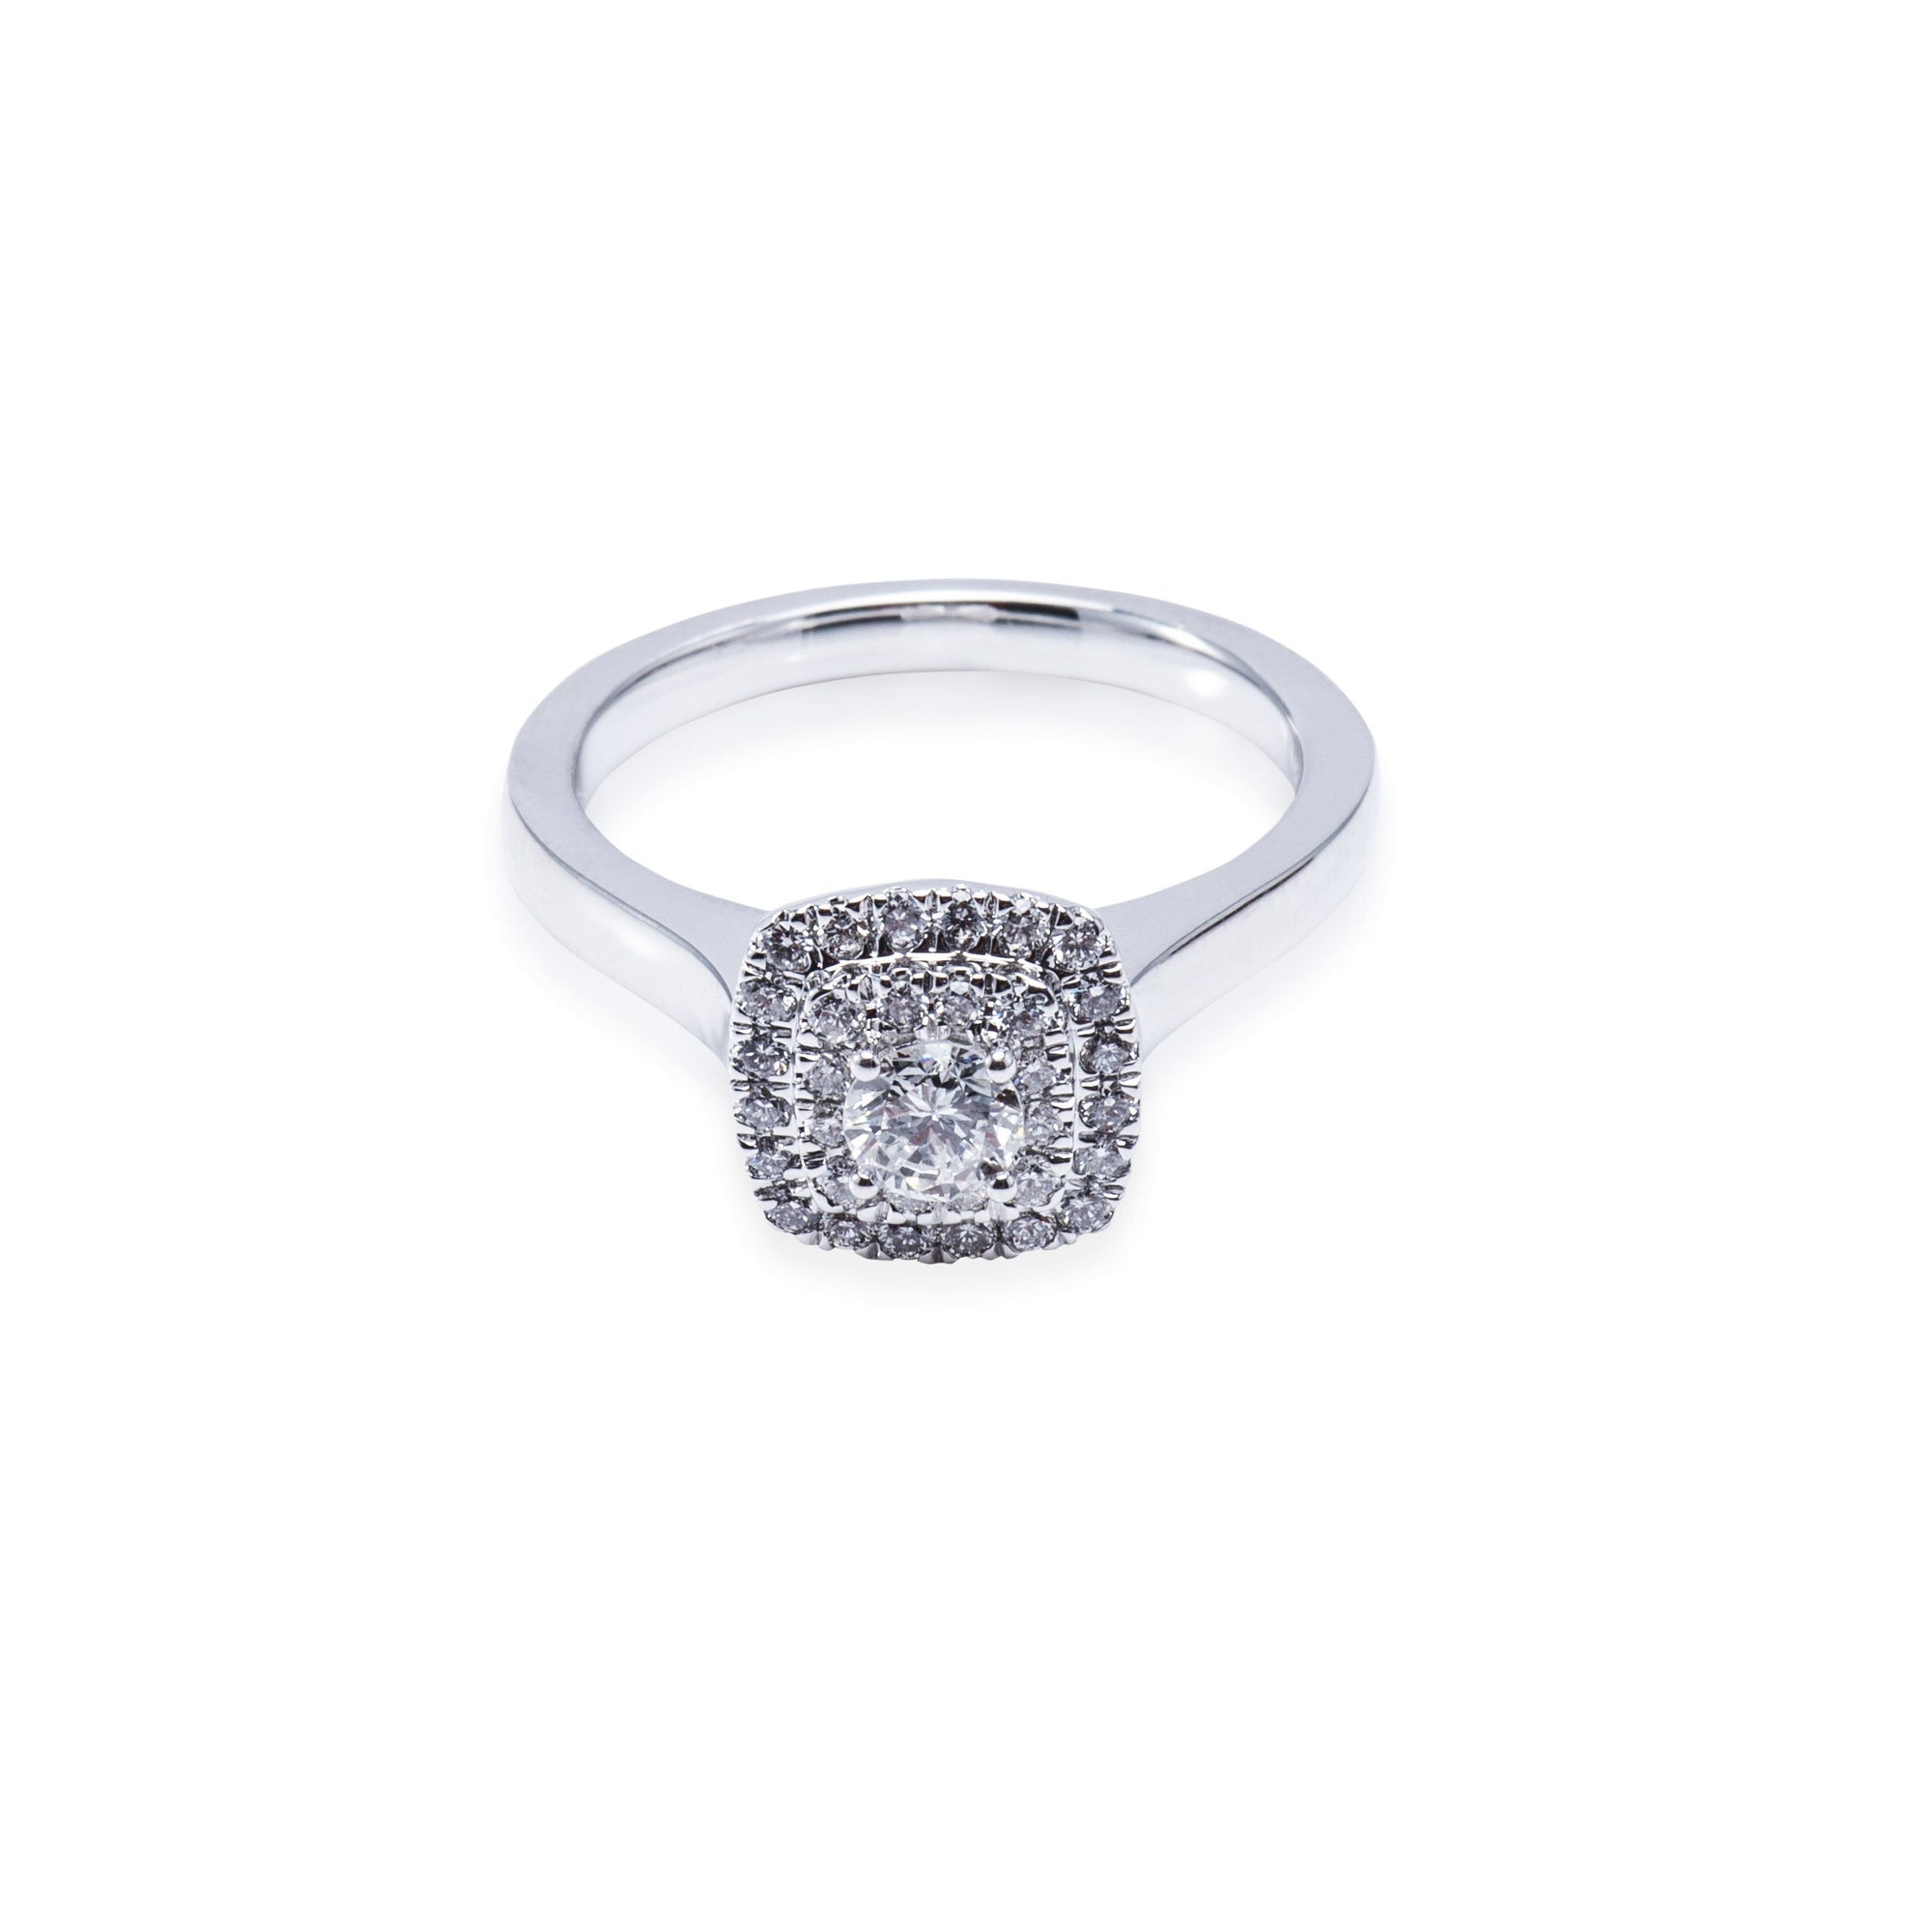 18CT WHITE GOLD HALO STYLE DIAMOND RING Aces Jewellers 